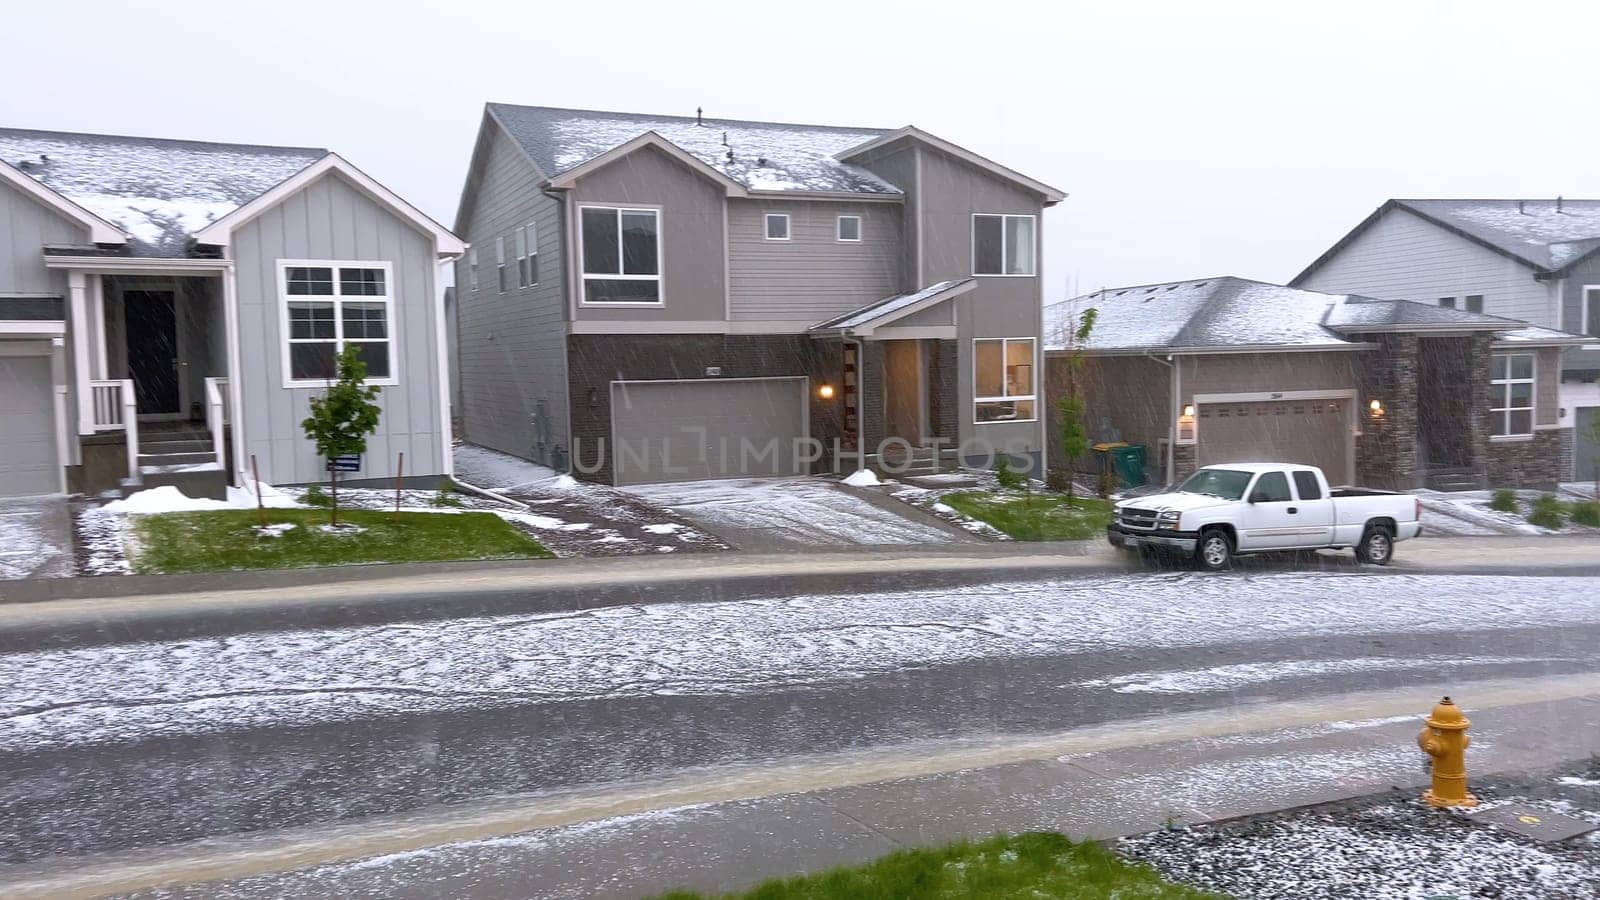 Suburban Neighborhood Covered in Hail After a Storm by arinahabich